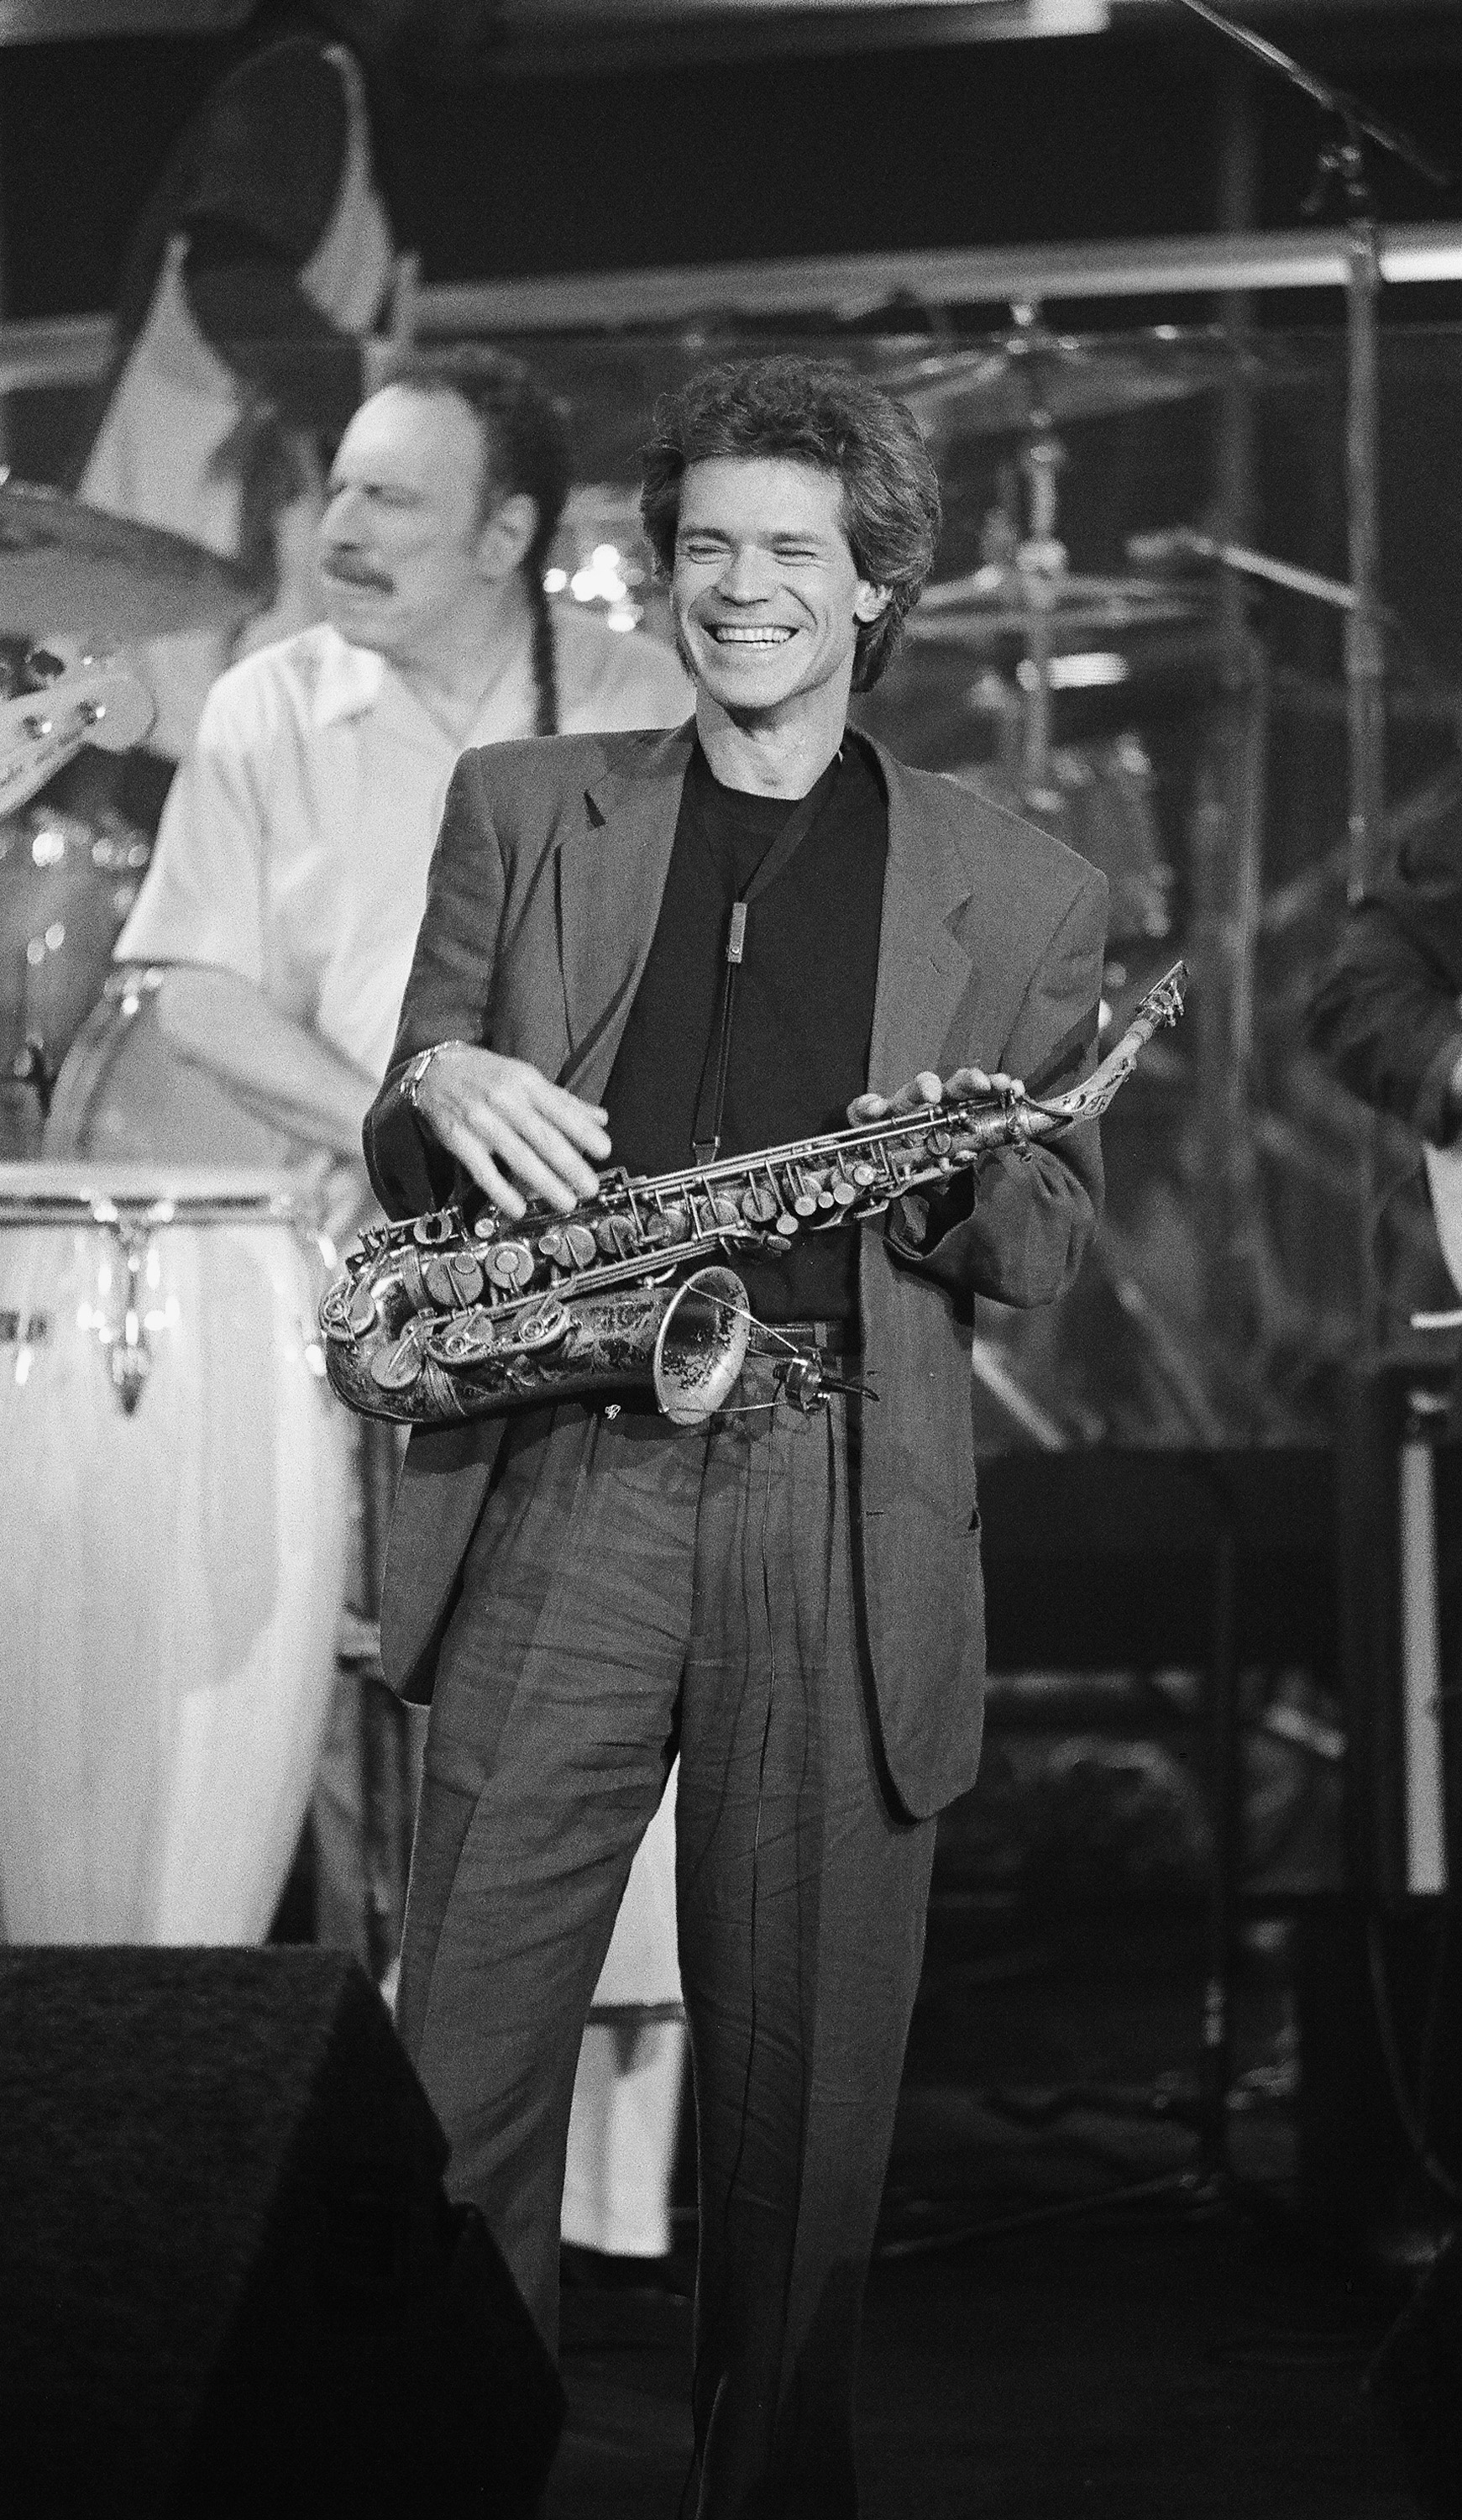 David on The Tonight Show in 1992